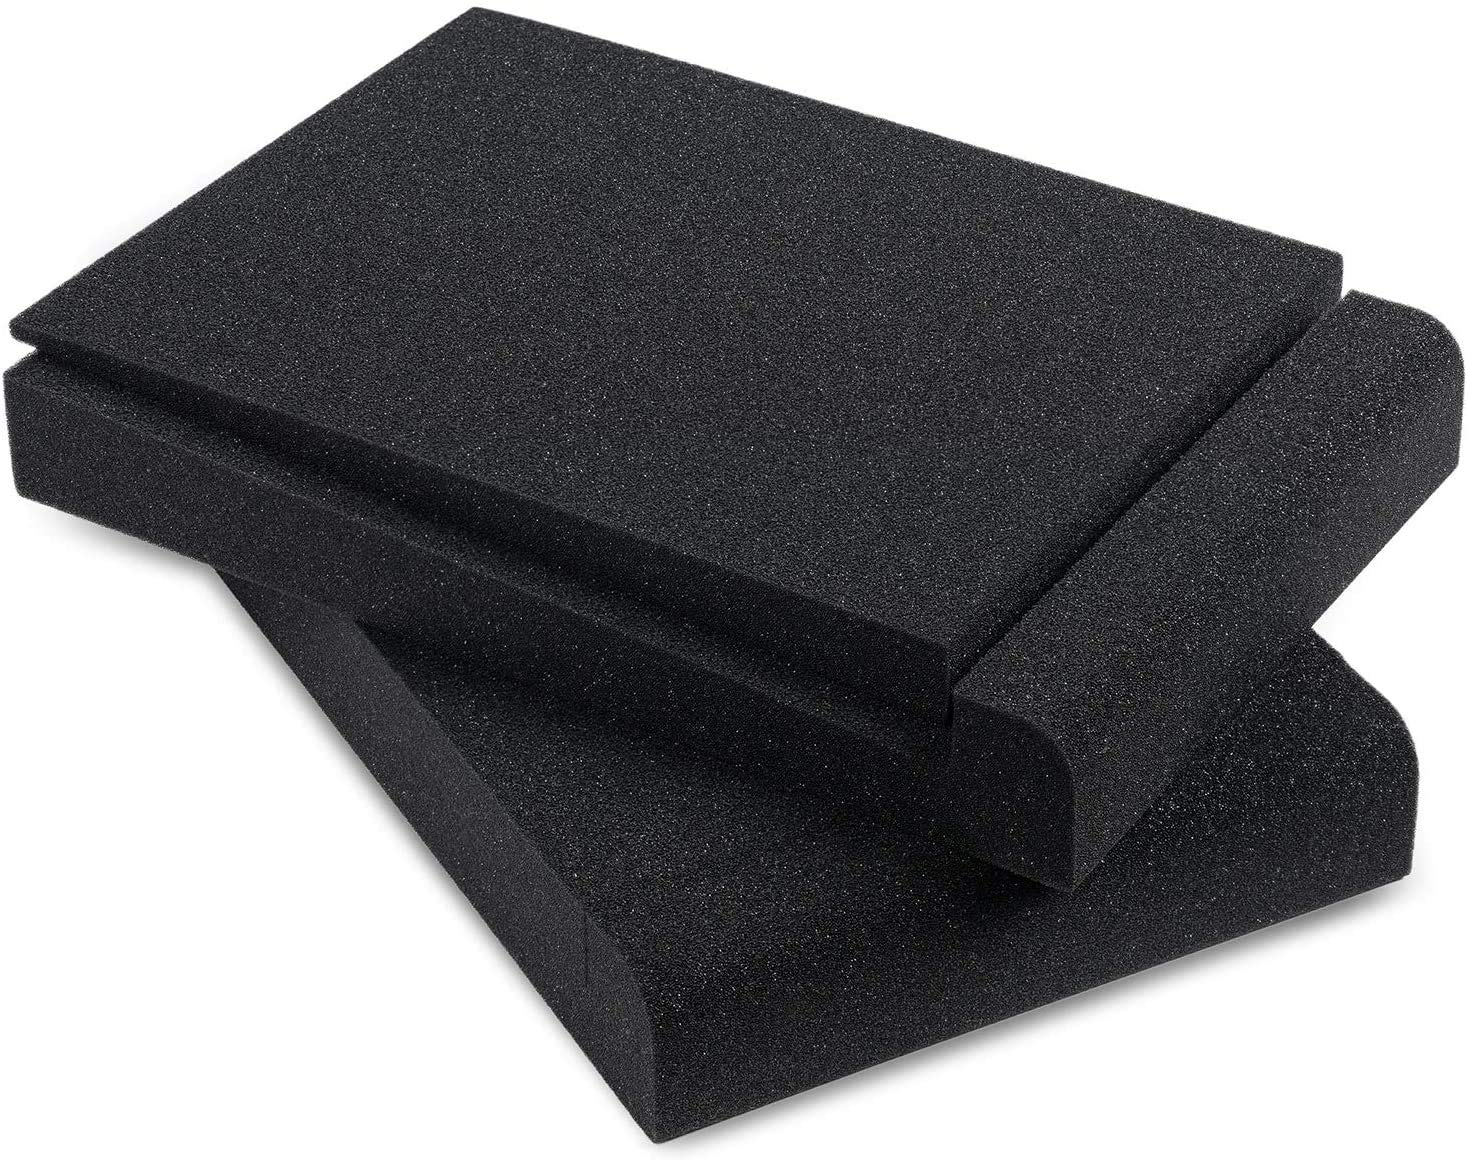 Hukimoyo Studio monitor isolation pads, Soundproofing insulation with High-Density Acoustic Foam for 5" Inch Speakers Prevent Vibrations(1 set, Black)